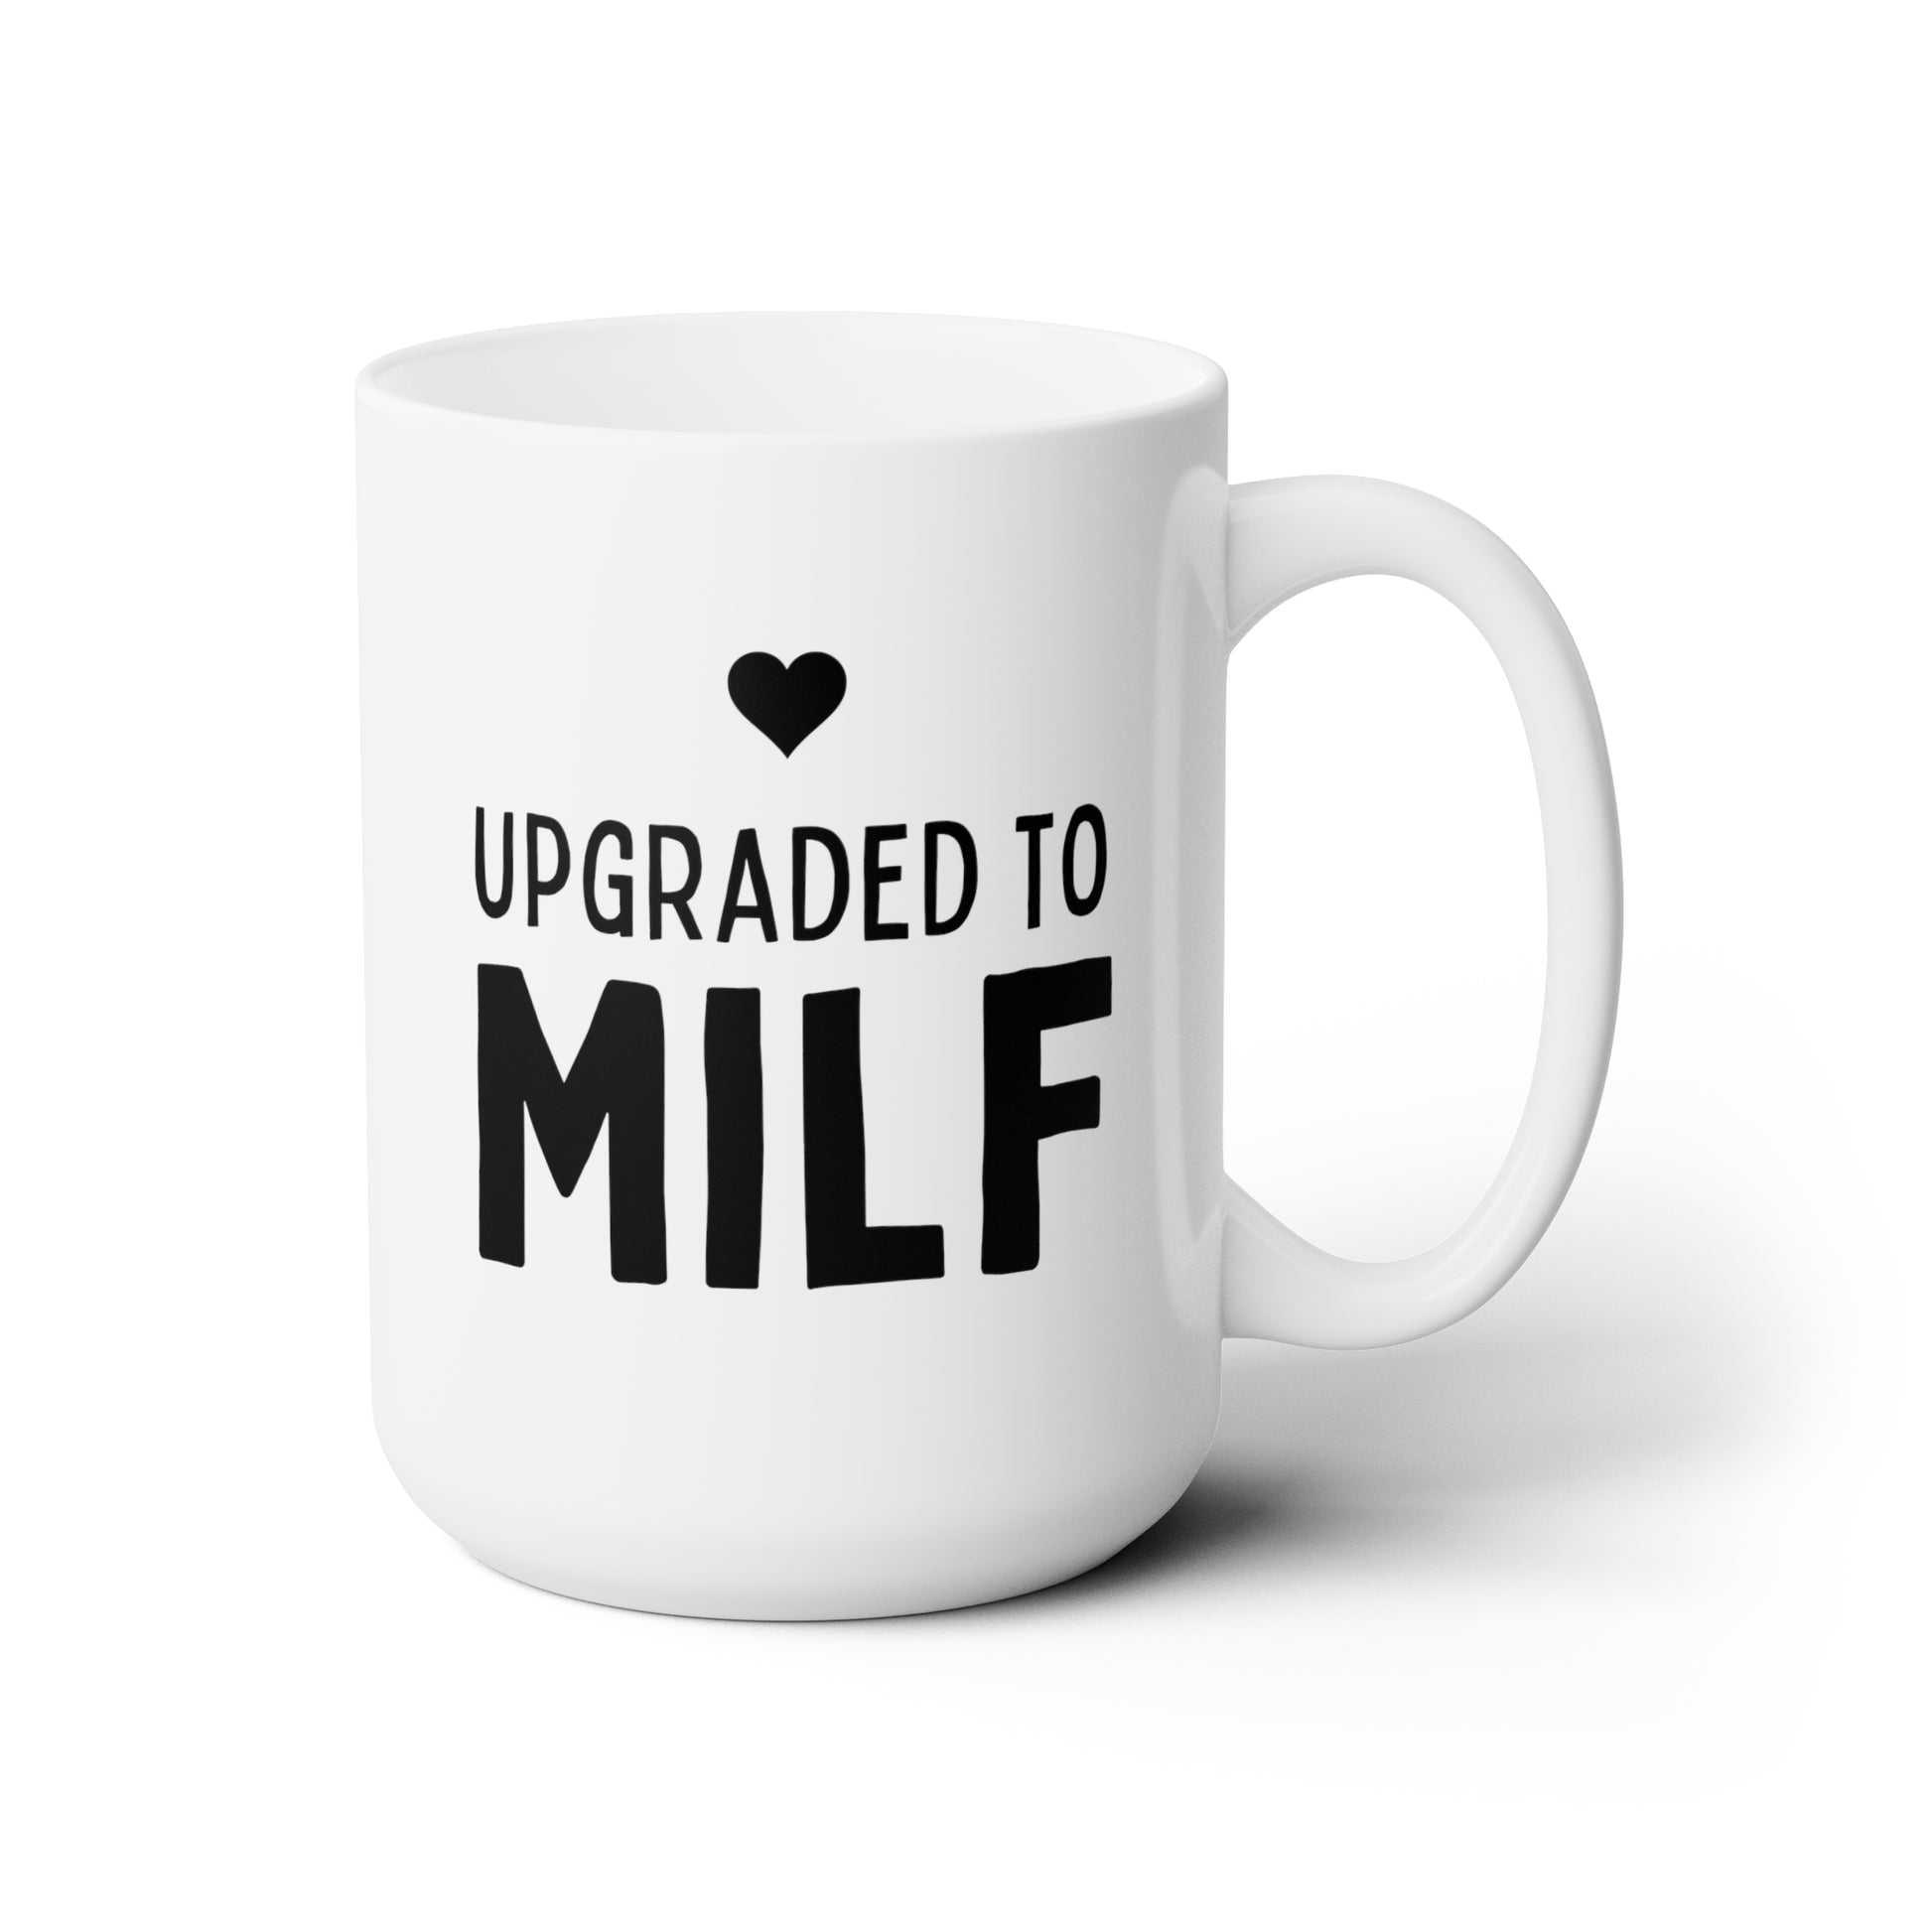 Upgraded to MILF 15oz white Funny large Coffee Mug gift for mothers day expecting mom new mom pregnancy announcement baby shower waveywares wavey wares wavywares wavy wares